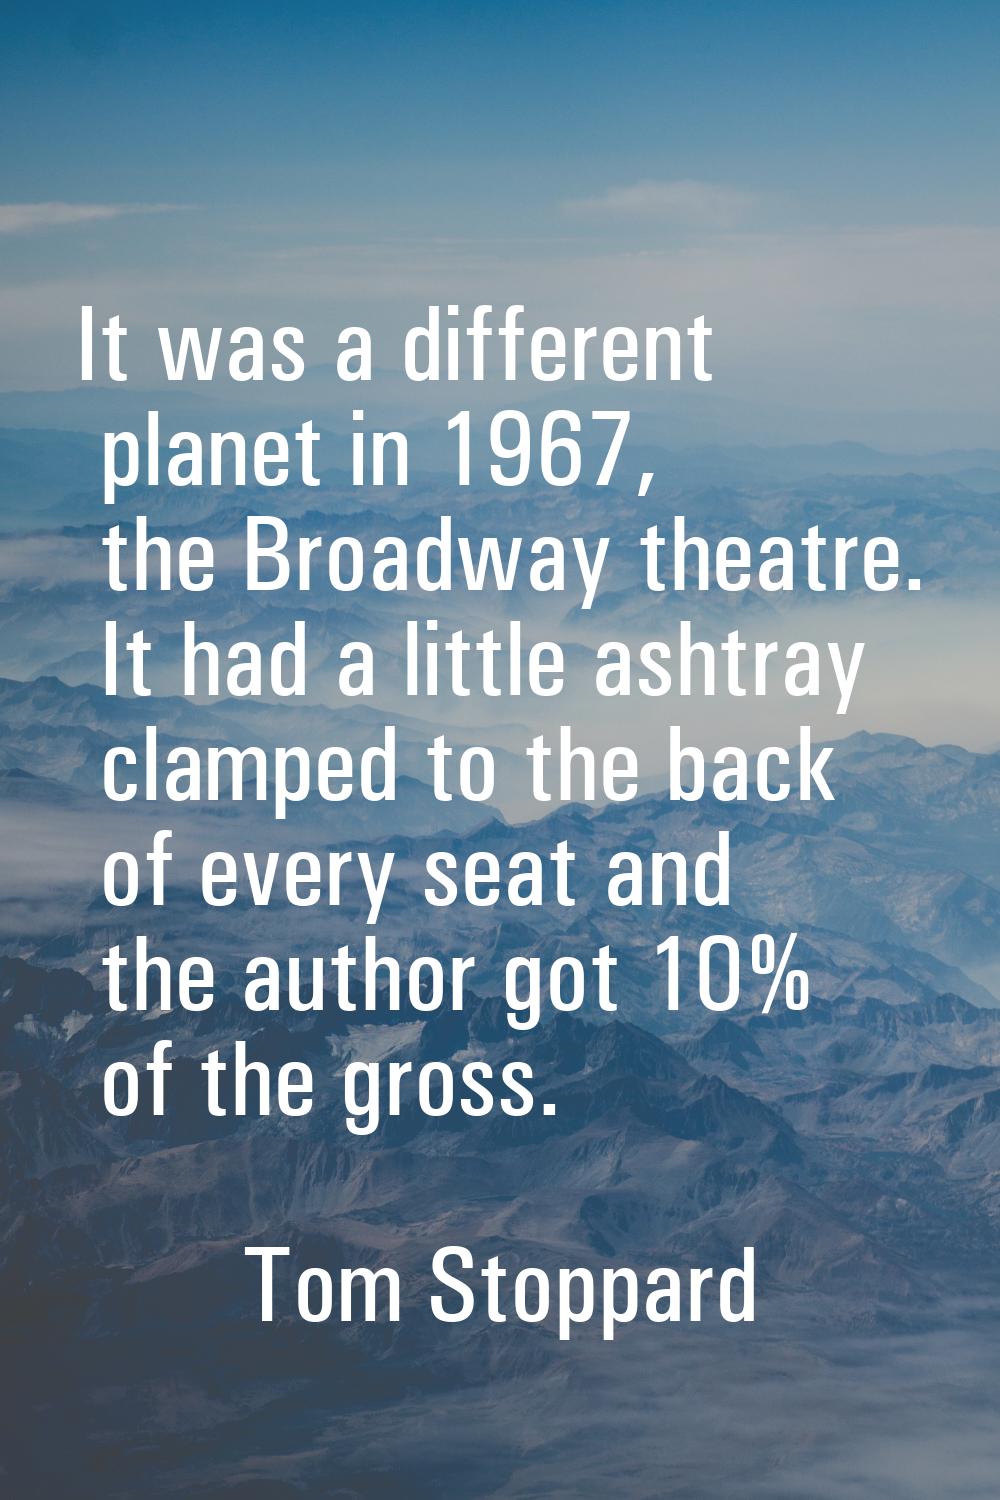 It was a different planet in 1967, the Broadway theatre. It had a little ashtray clamped to the bac